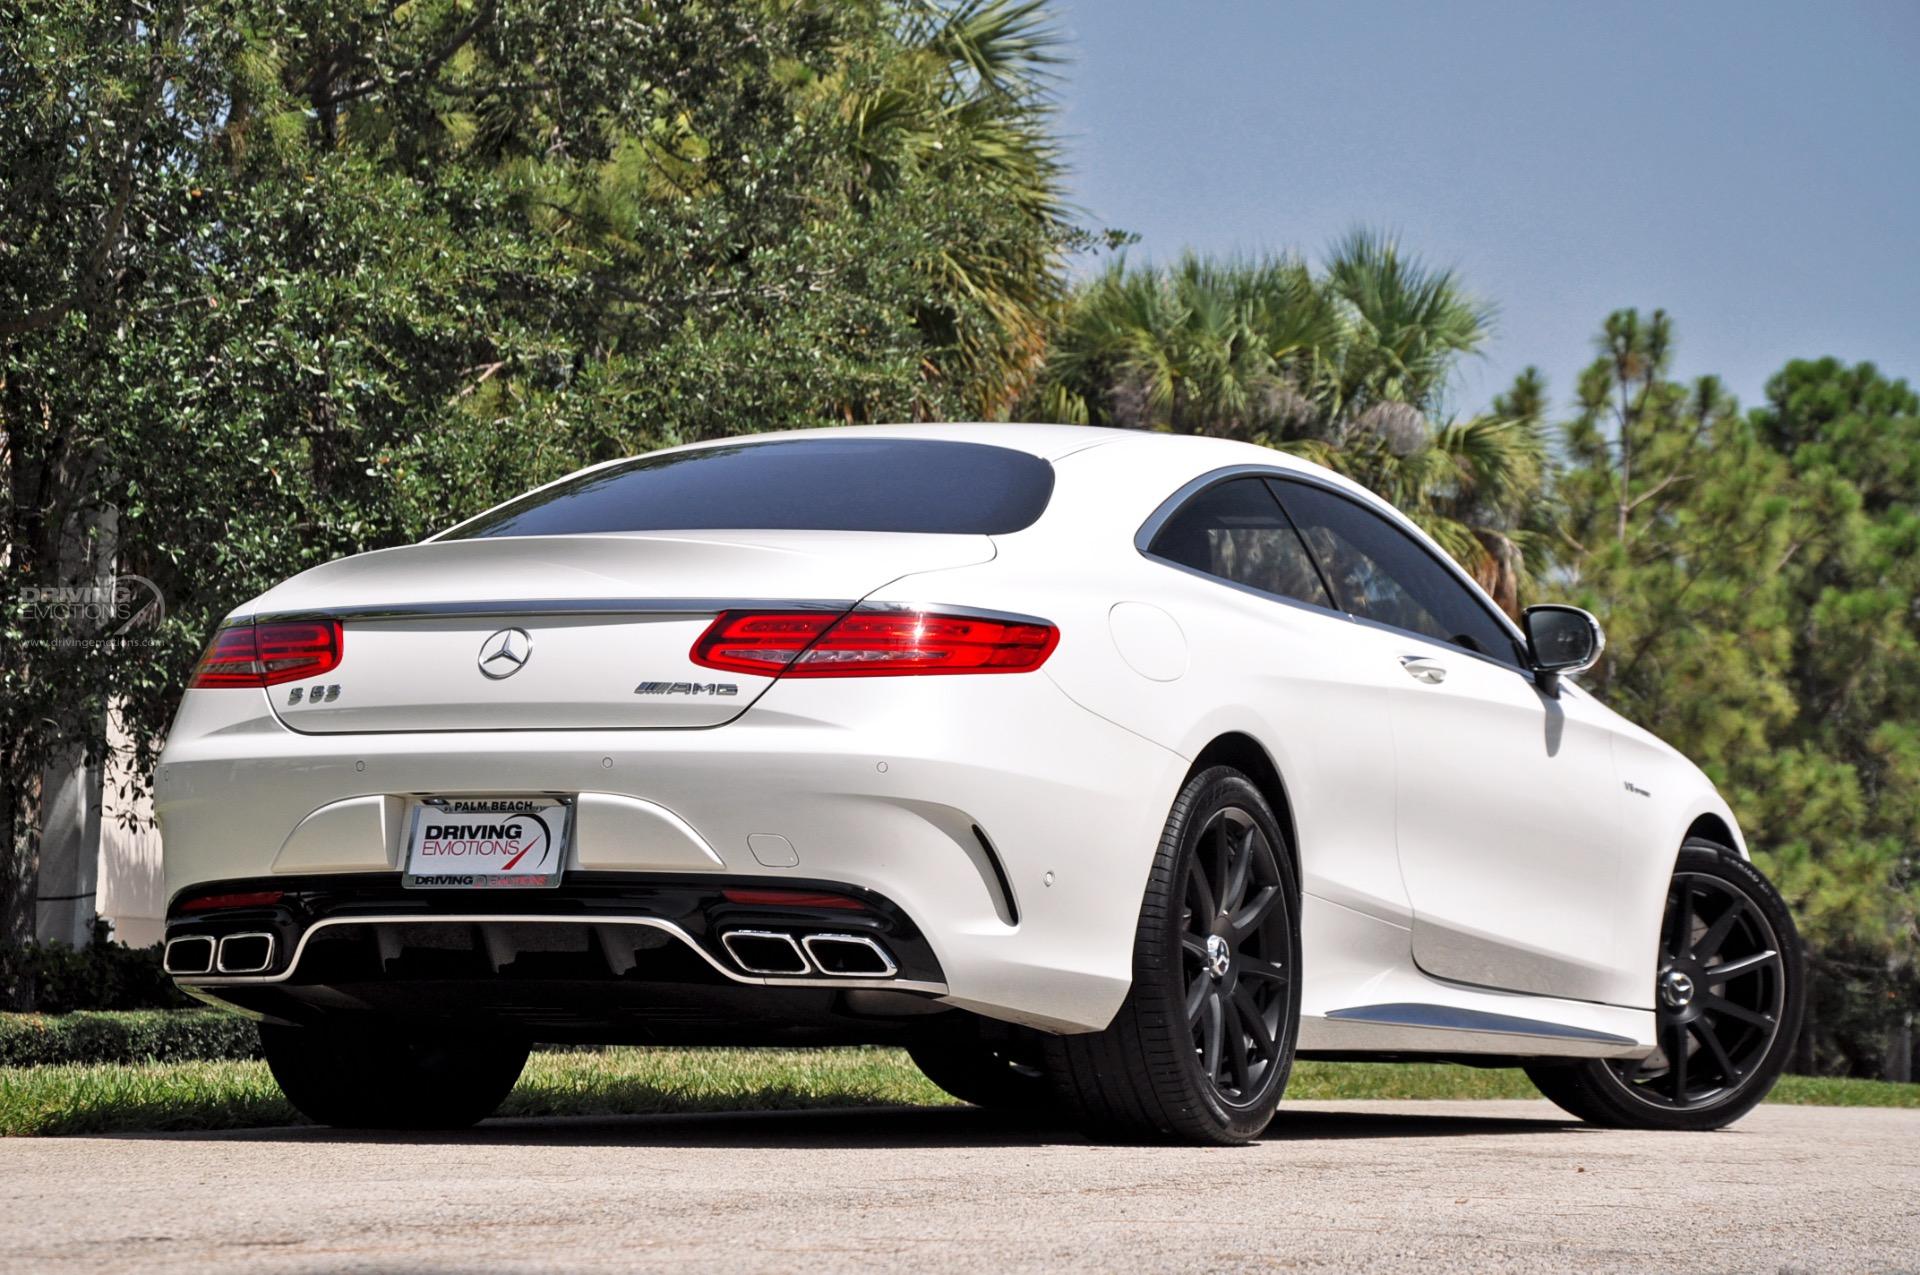 Used 2015 Mercedes-Benz S63 AMG 4MATIC Coupe S63 AMG Lake Park, FL.